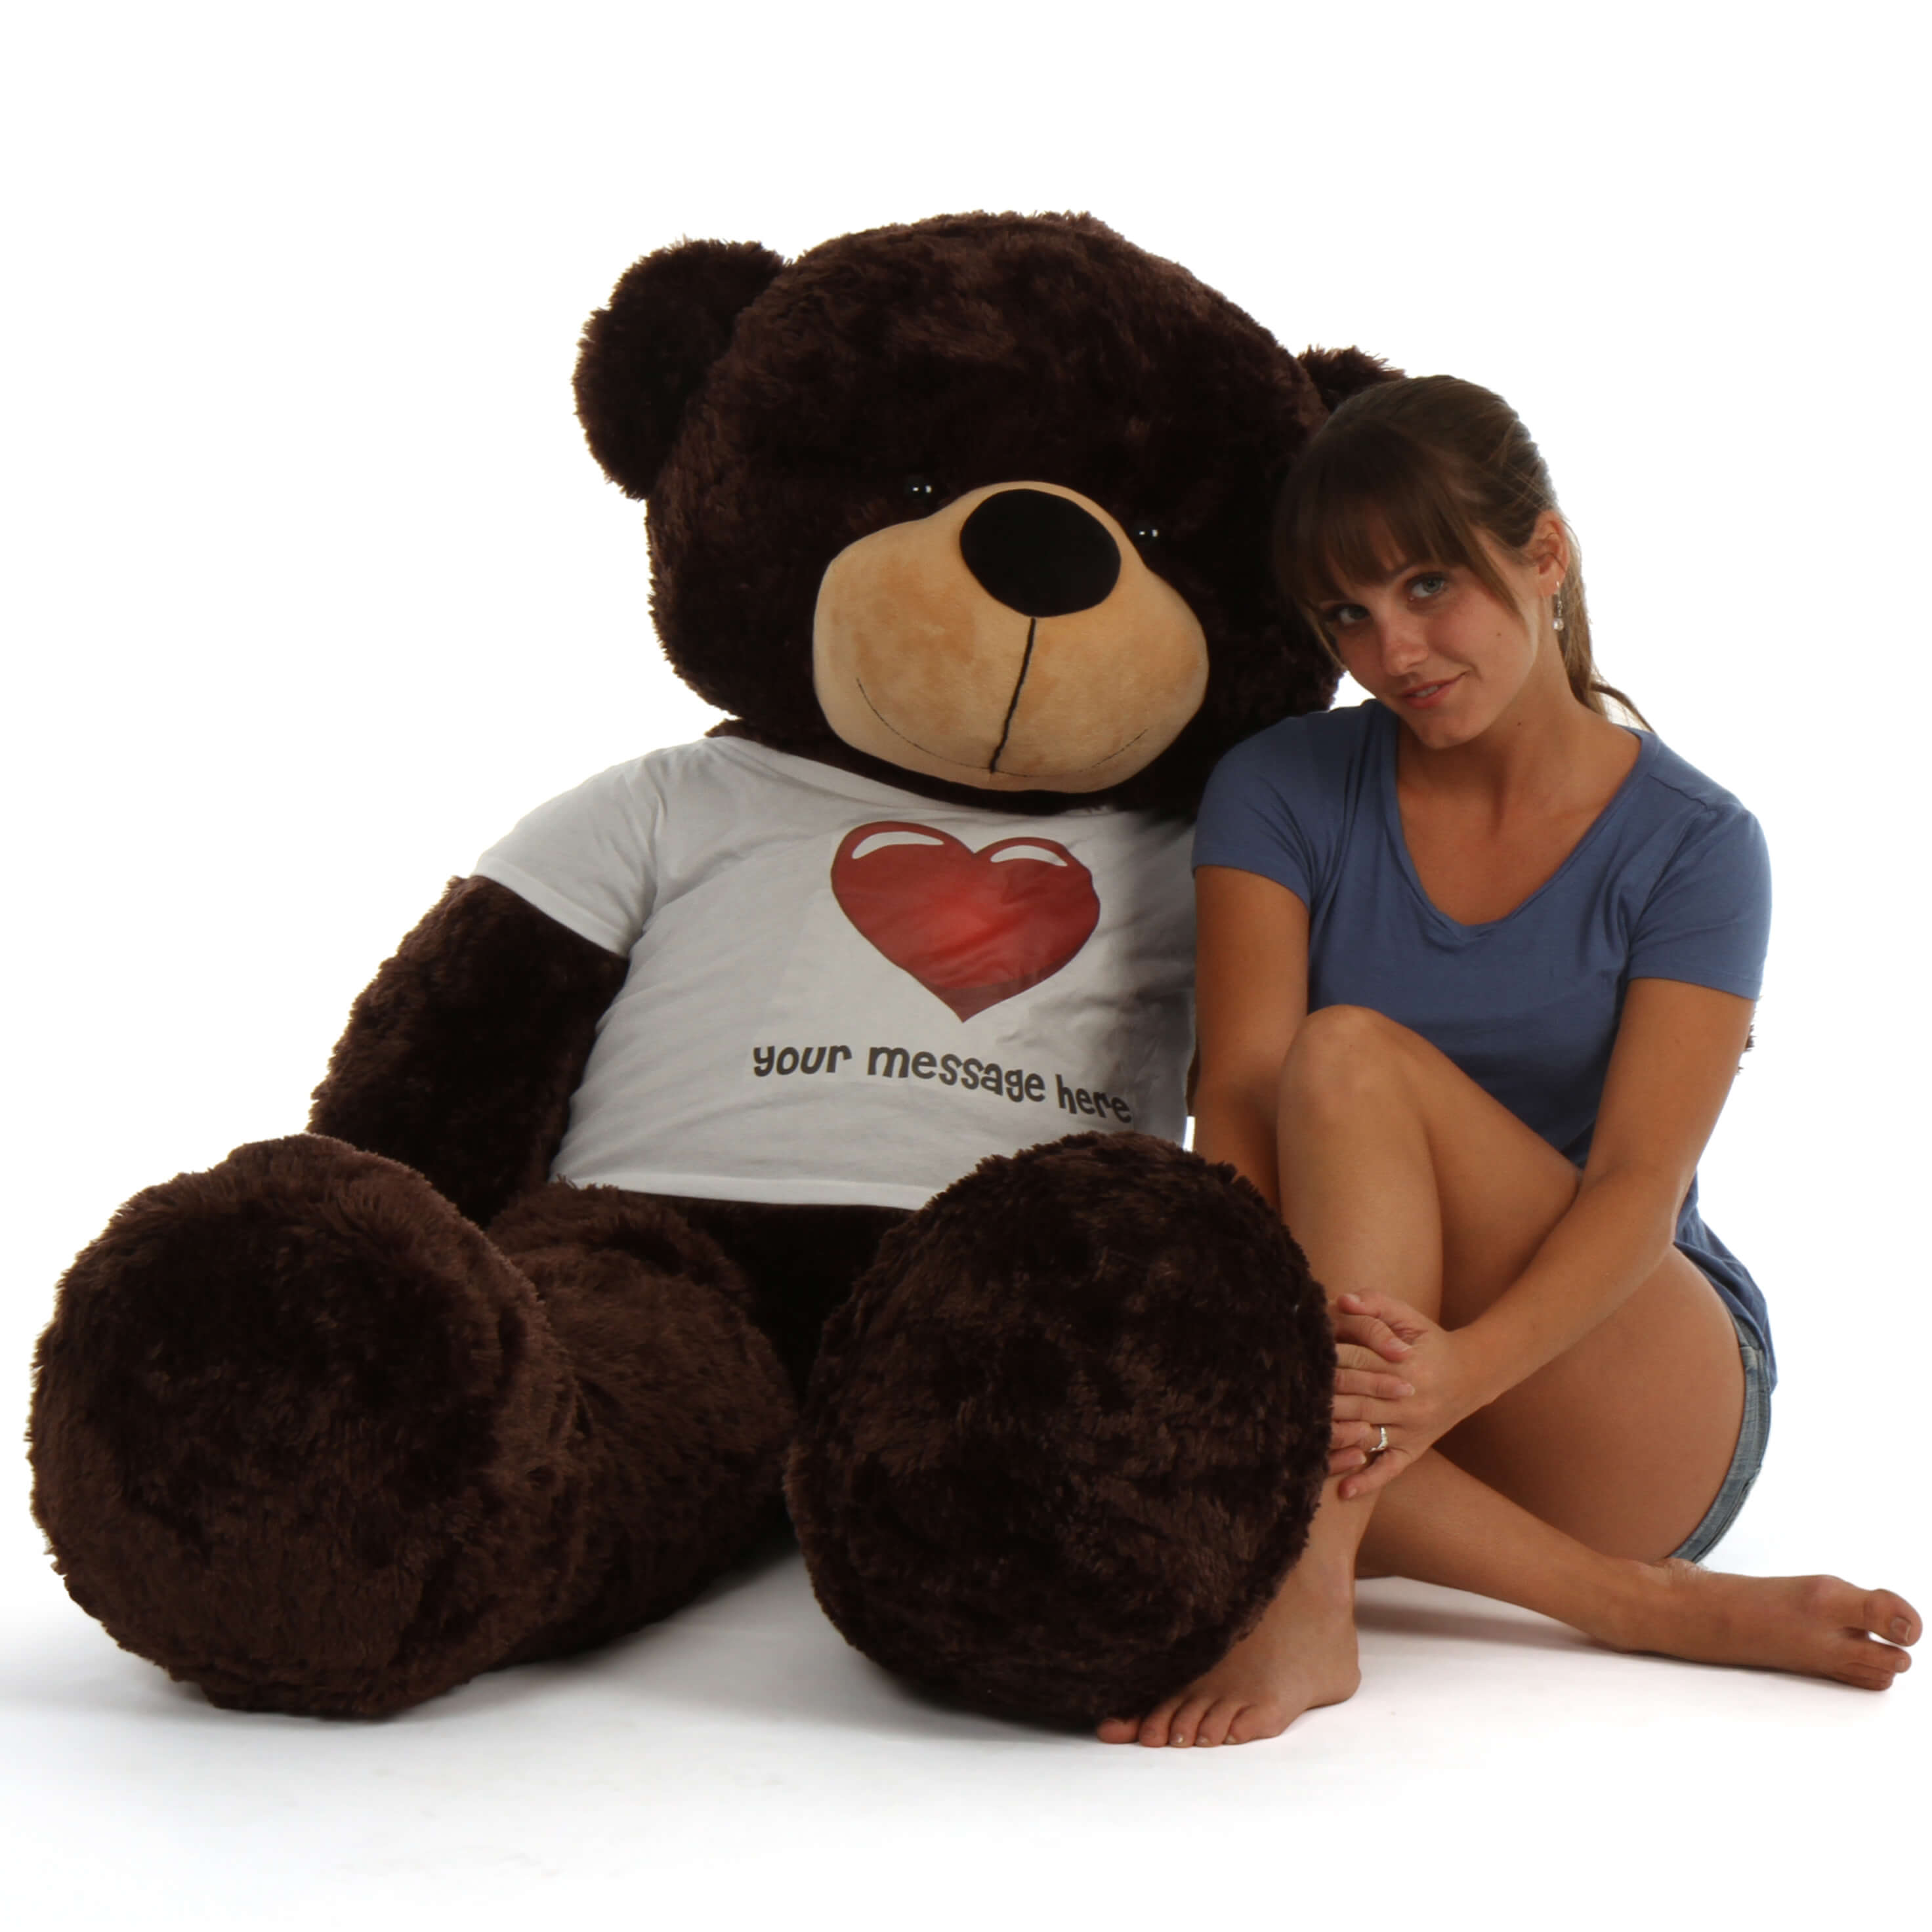 5ft-life-size-personalized-dark-brown-teddy-bear-brownie-cuddles-in-red-heart-shirt-1.jpg